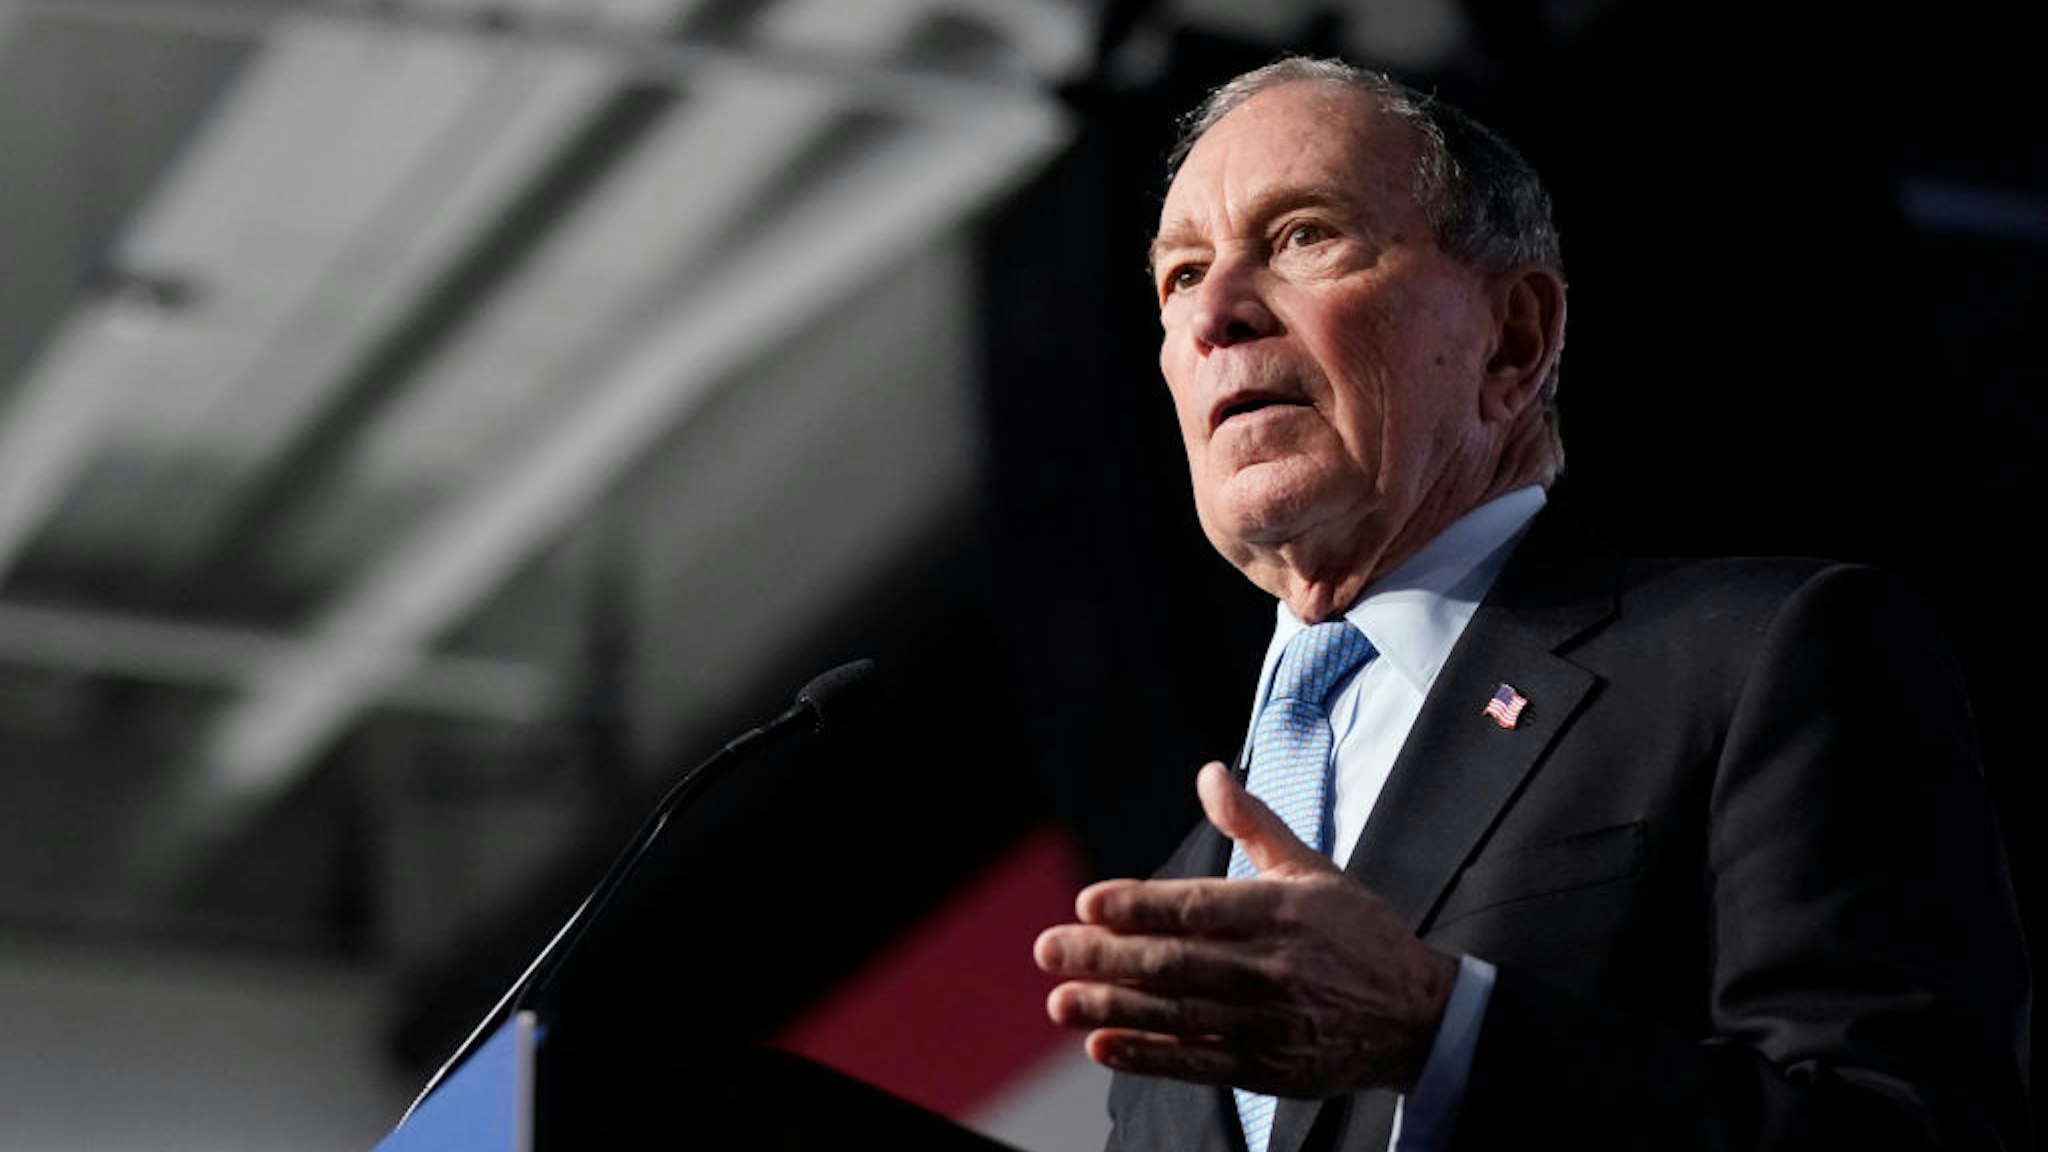 Democratic presidential candidate, Mike Bloomberg talks to supporters at a rally on February 20, 2020 in Salt Lake City, Utah. Bloomberg is making his second visit to Utah before it votes on super Tuesday March 3rd.(Photo by George Frey/Getty Images)